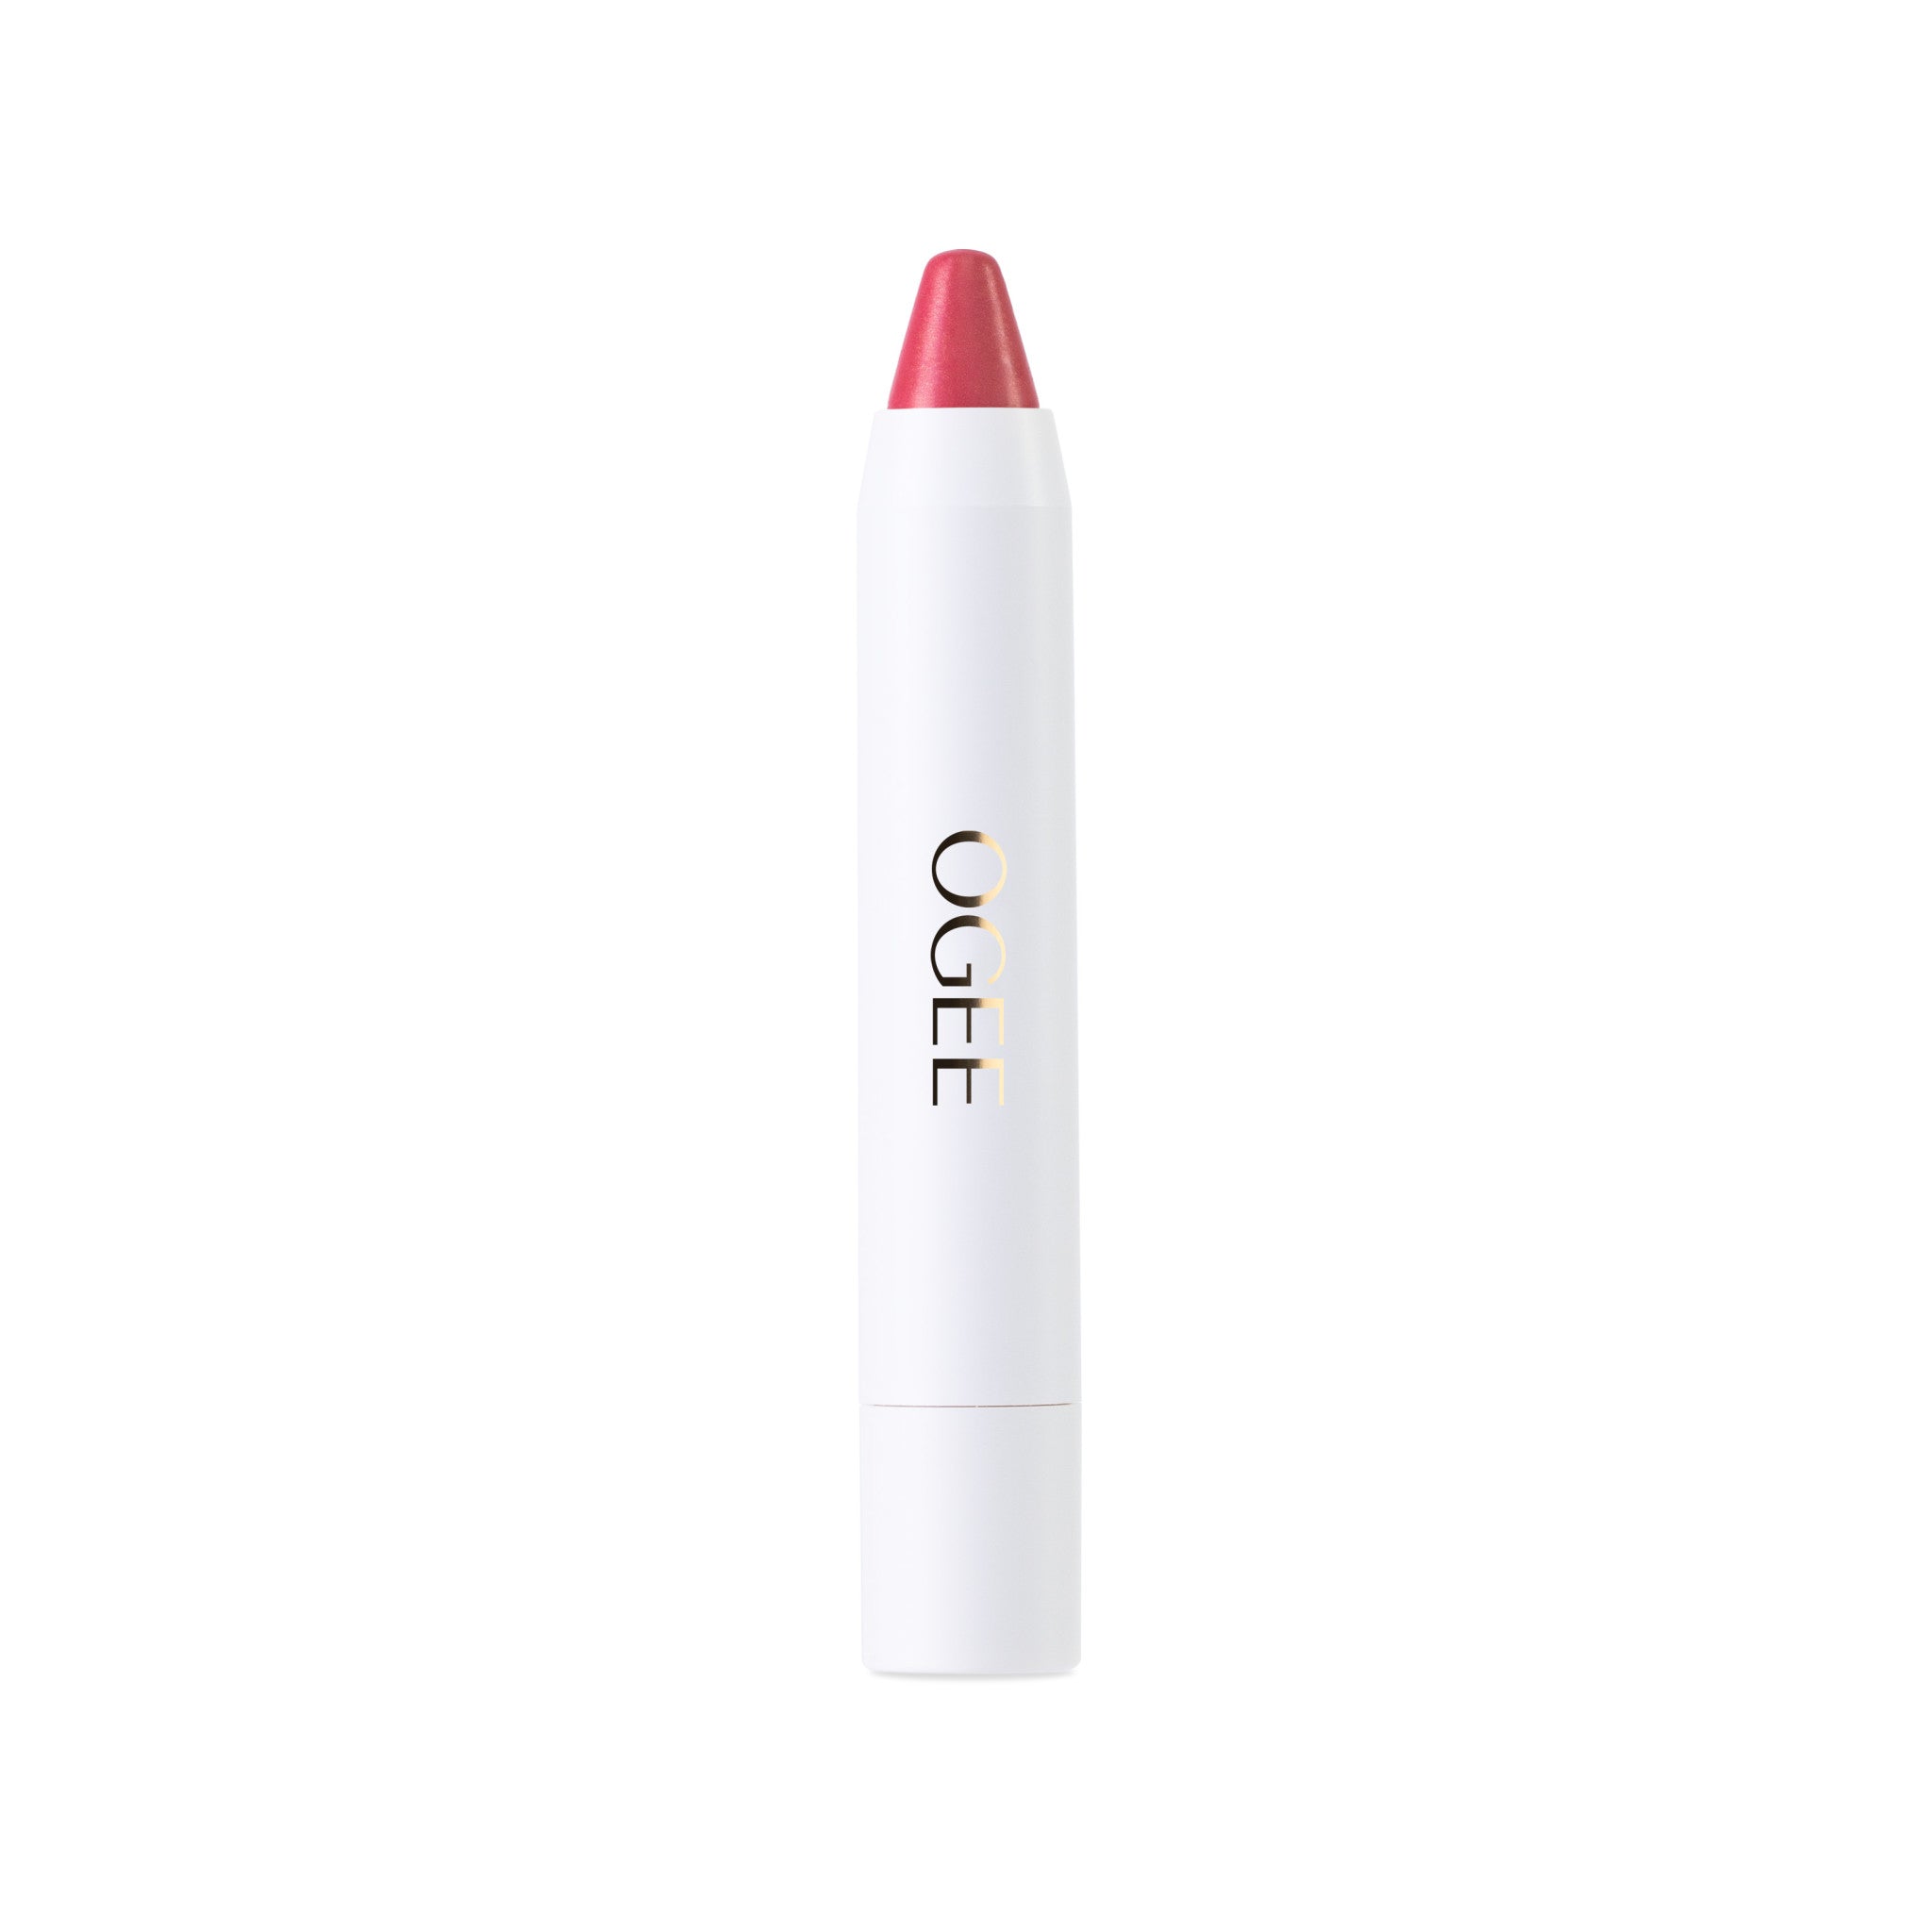 Ogee Tinted Sculpted Lip Oil Color/Shade variant: Camellia main image. This product is in the color pink